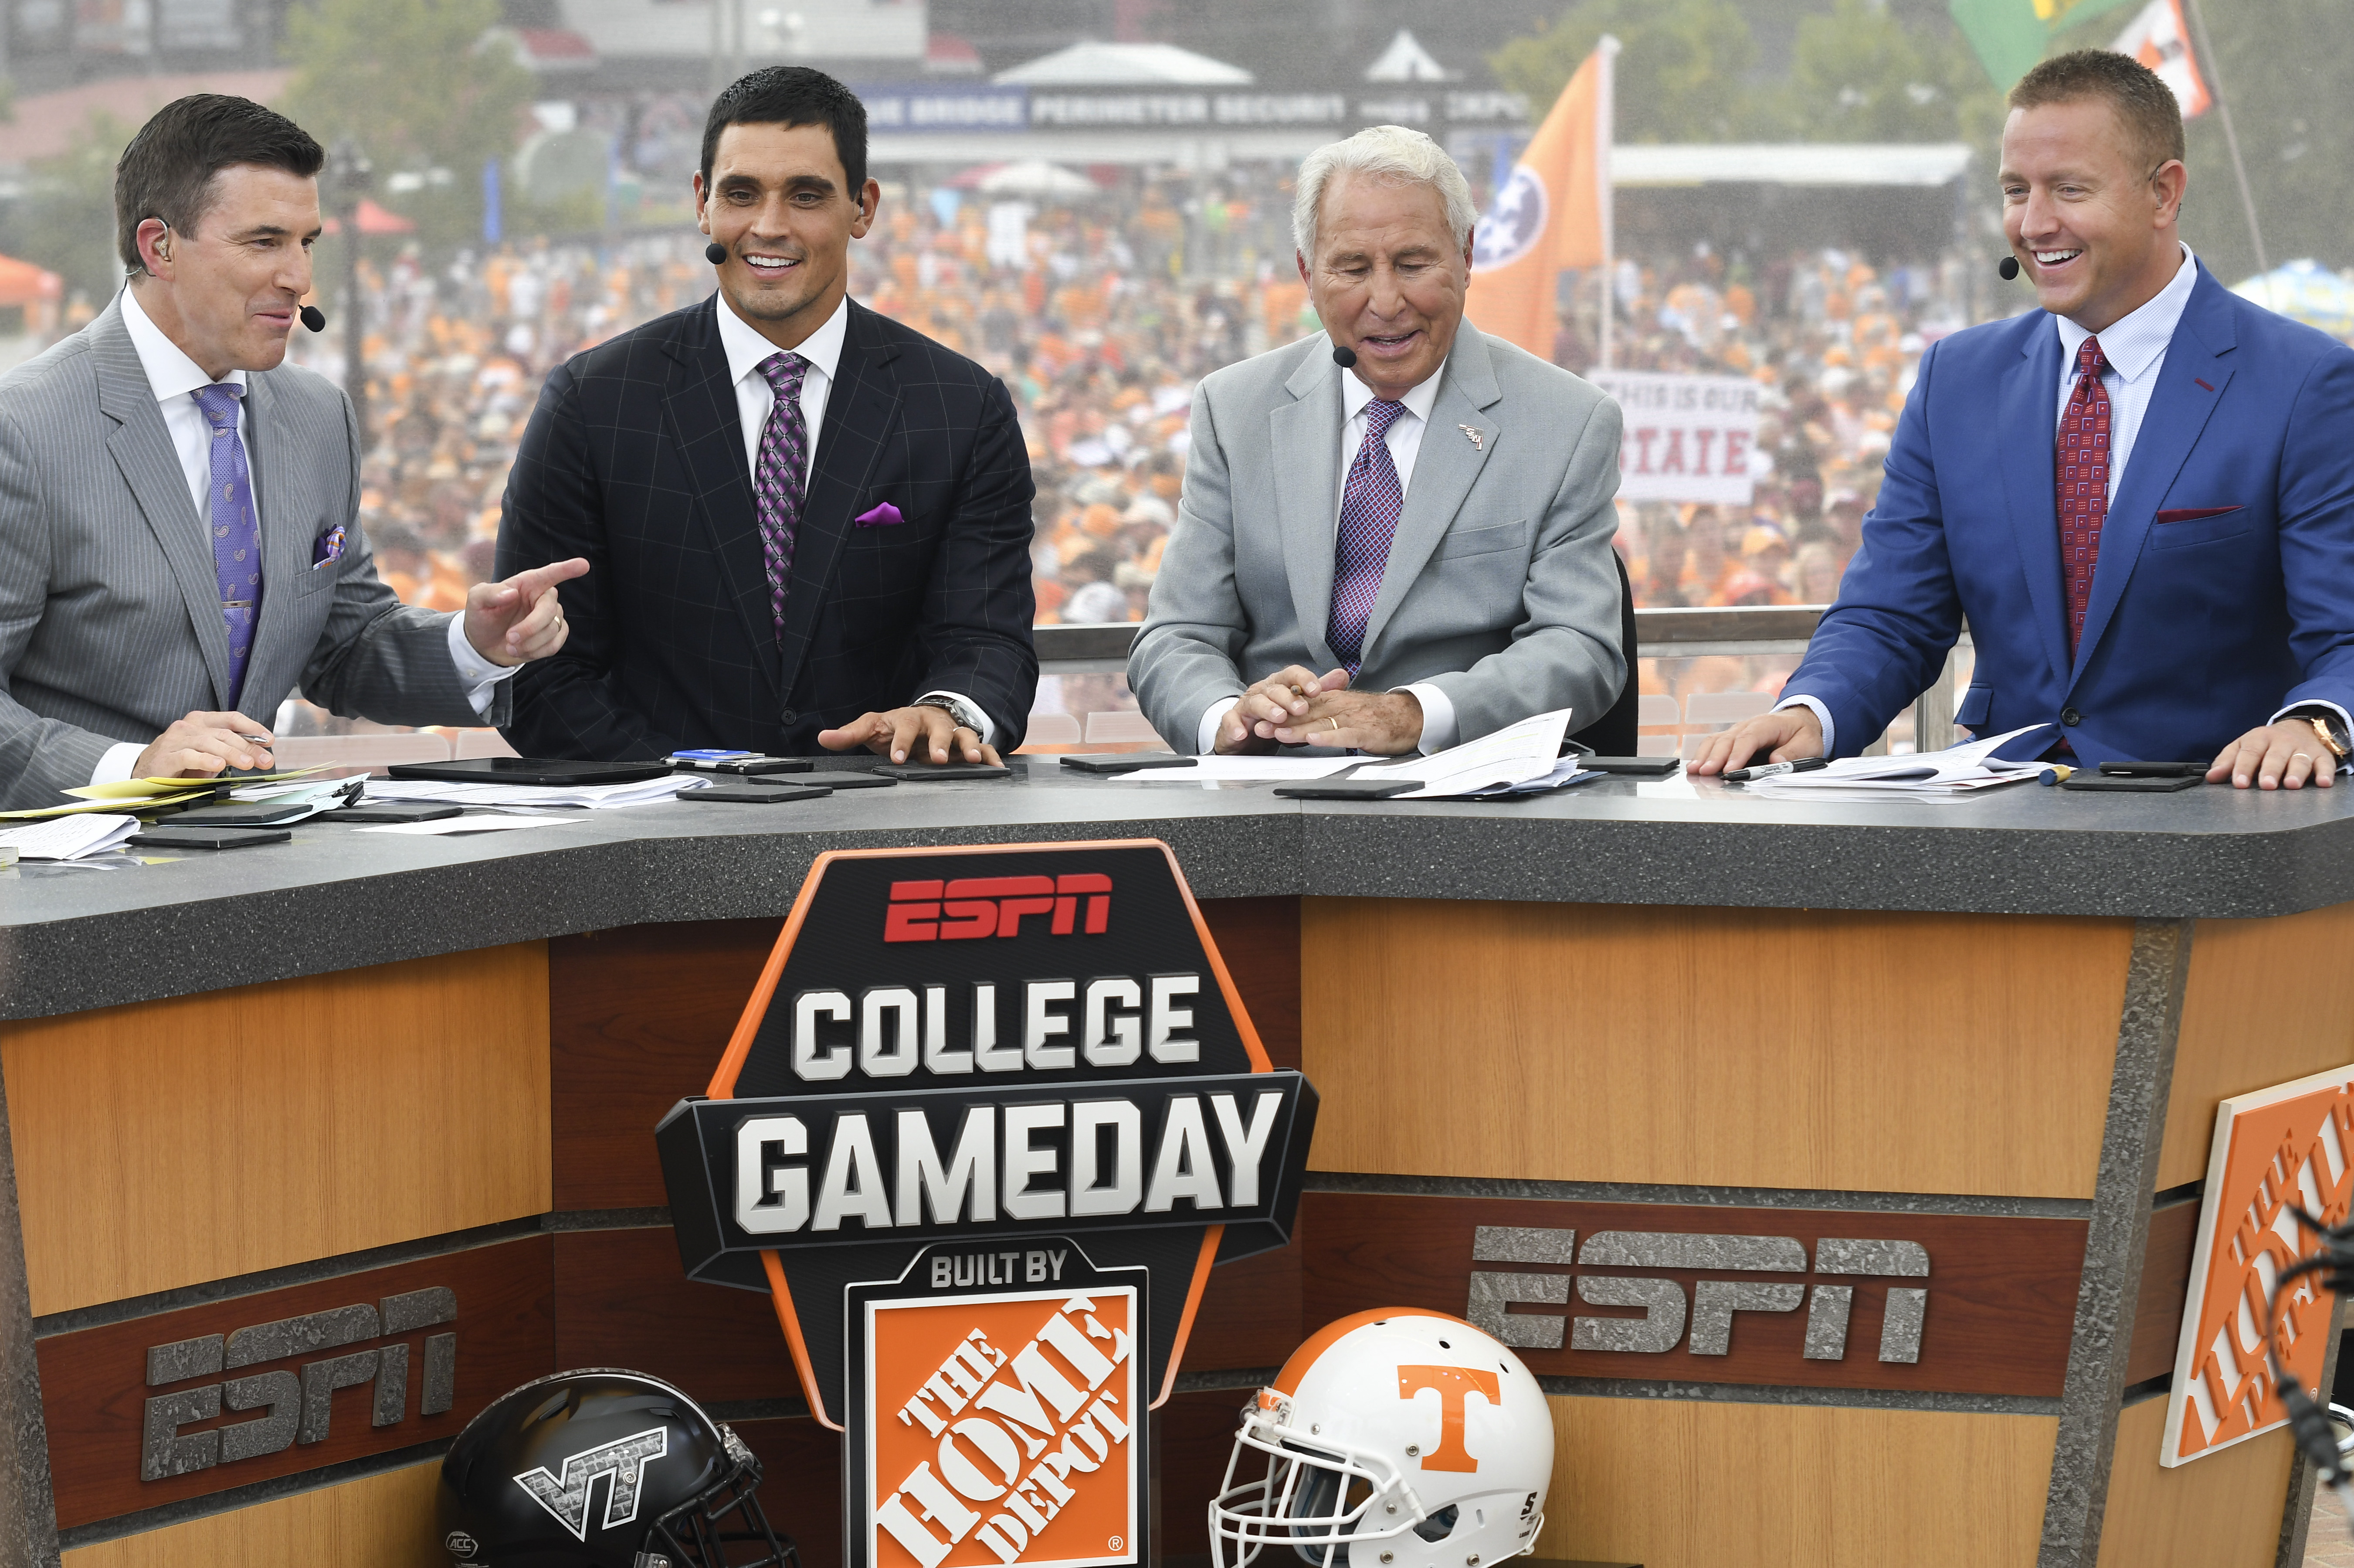 ESPN College GameDay Crew Picks and Predictions for Week 10 With Guest Picker Nick Lachey